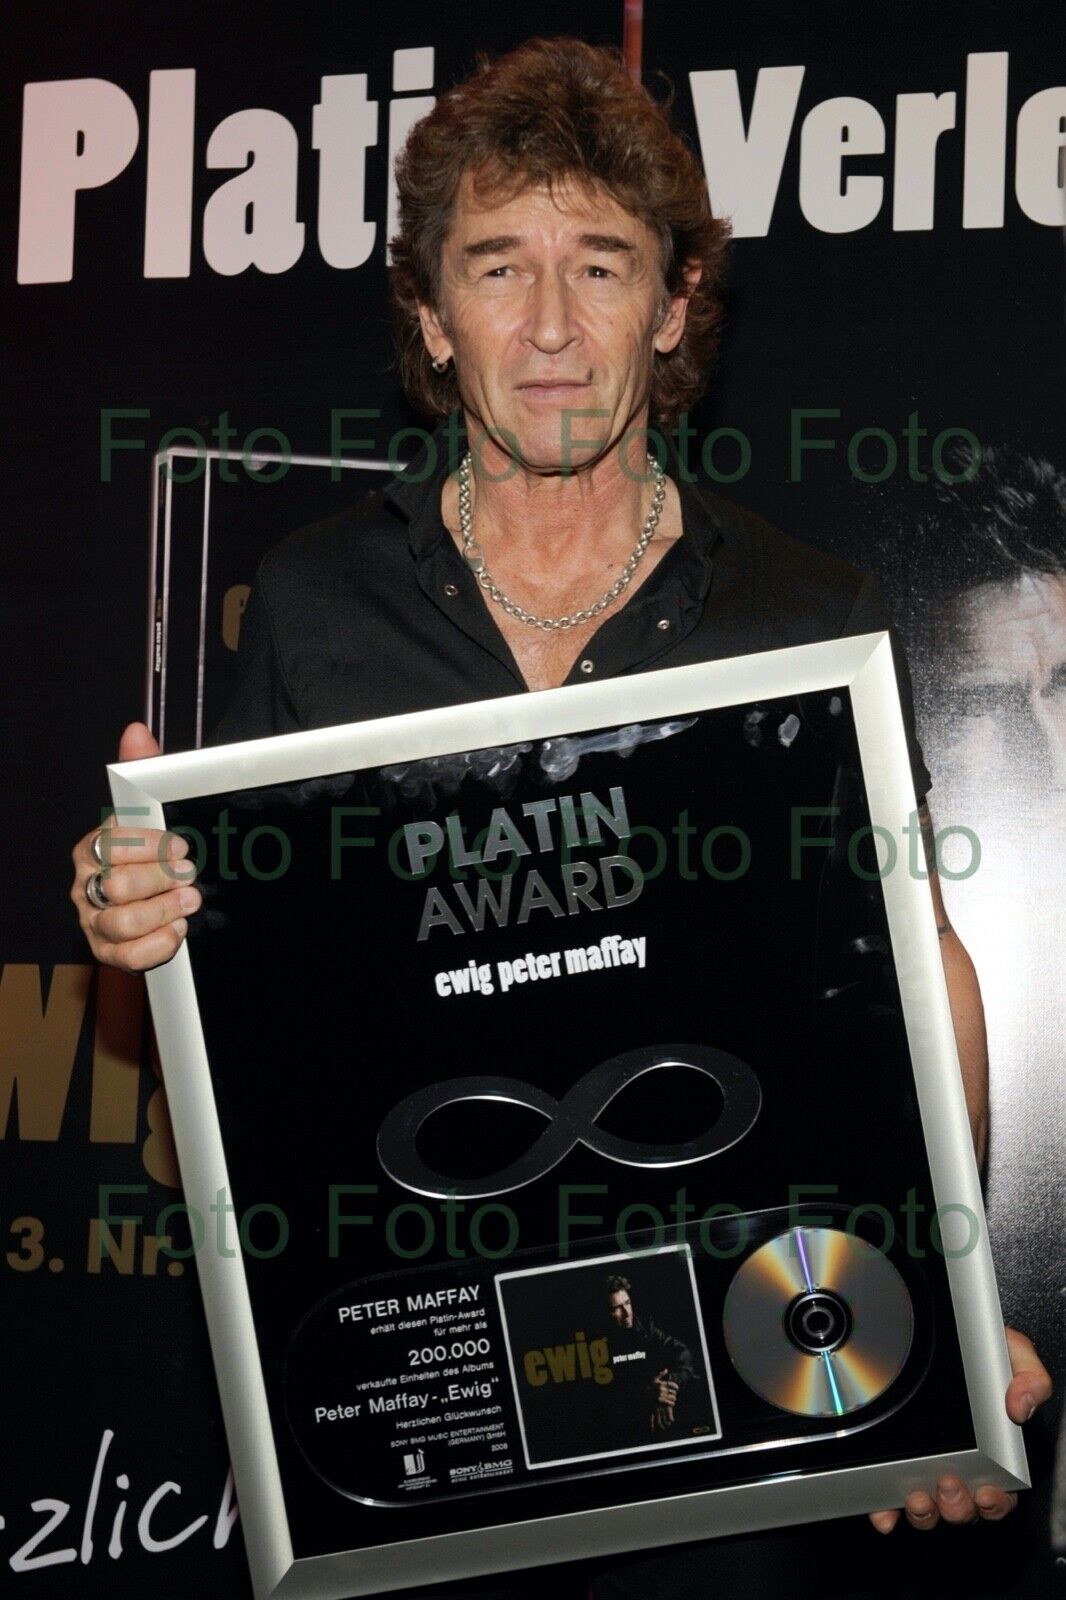 Peter Maffay Rock Pop Songs Music Photo Poster painting 20 X 30 CM Without Autograph (Be-39